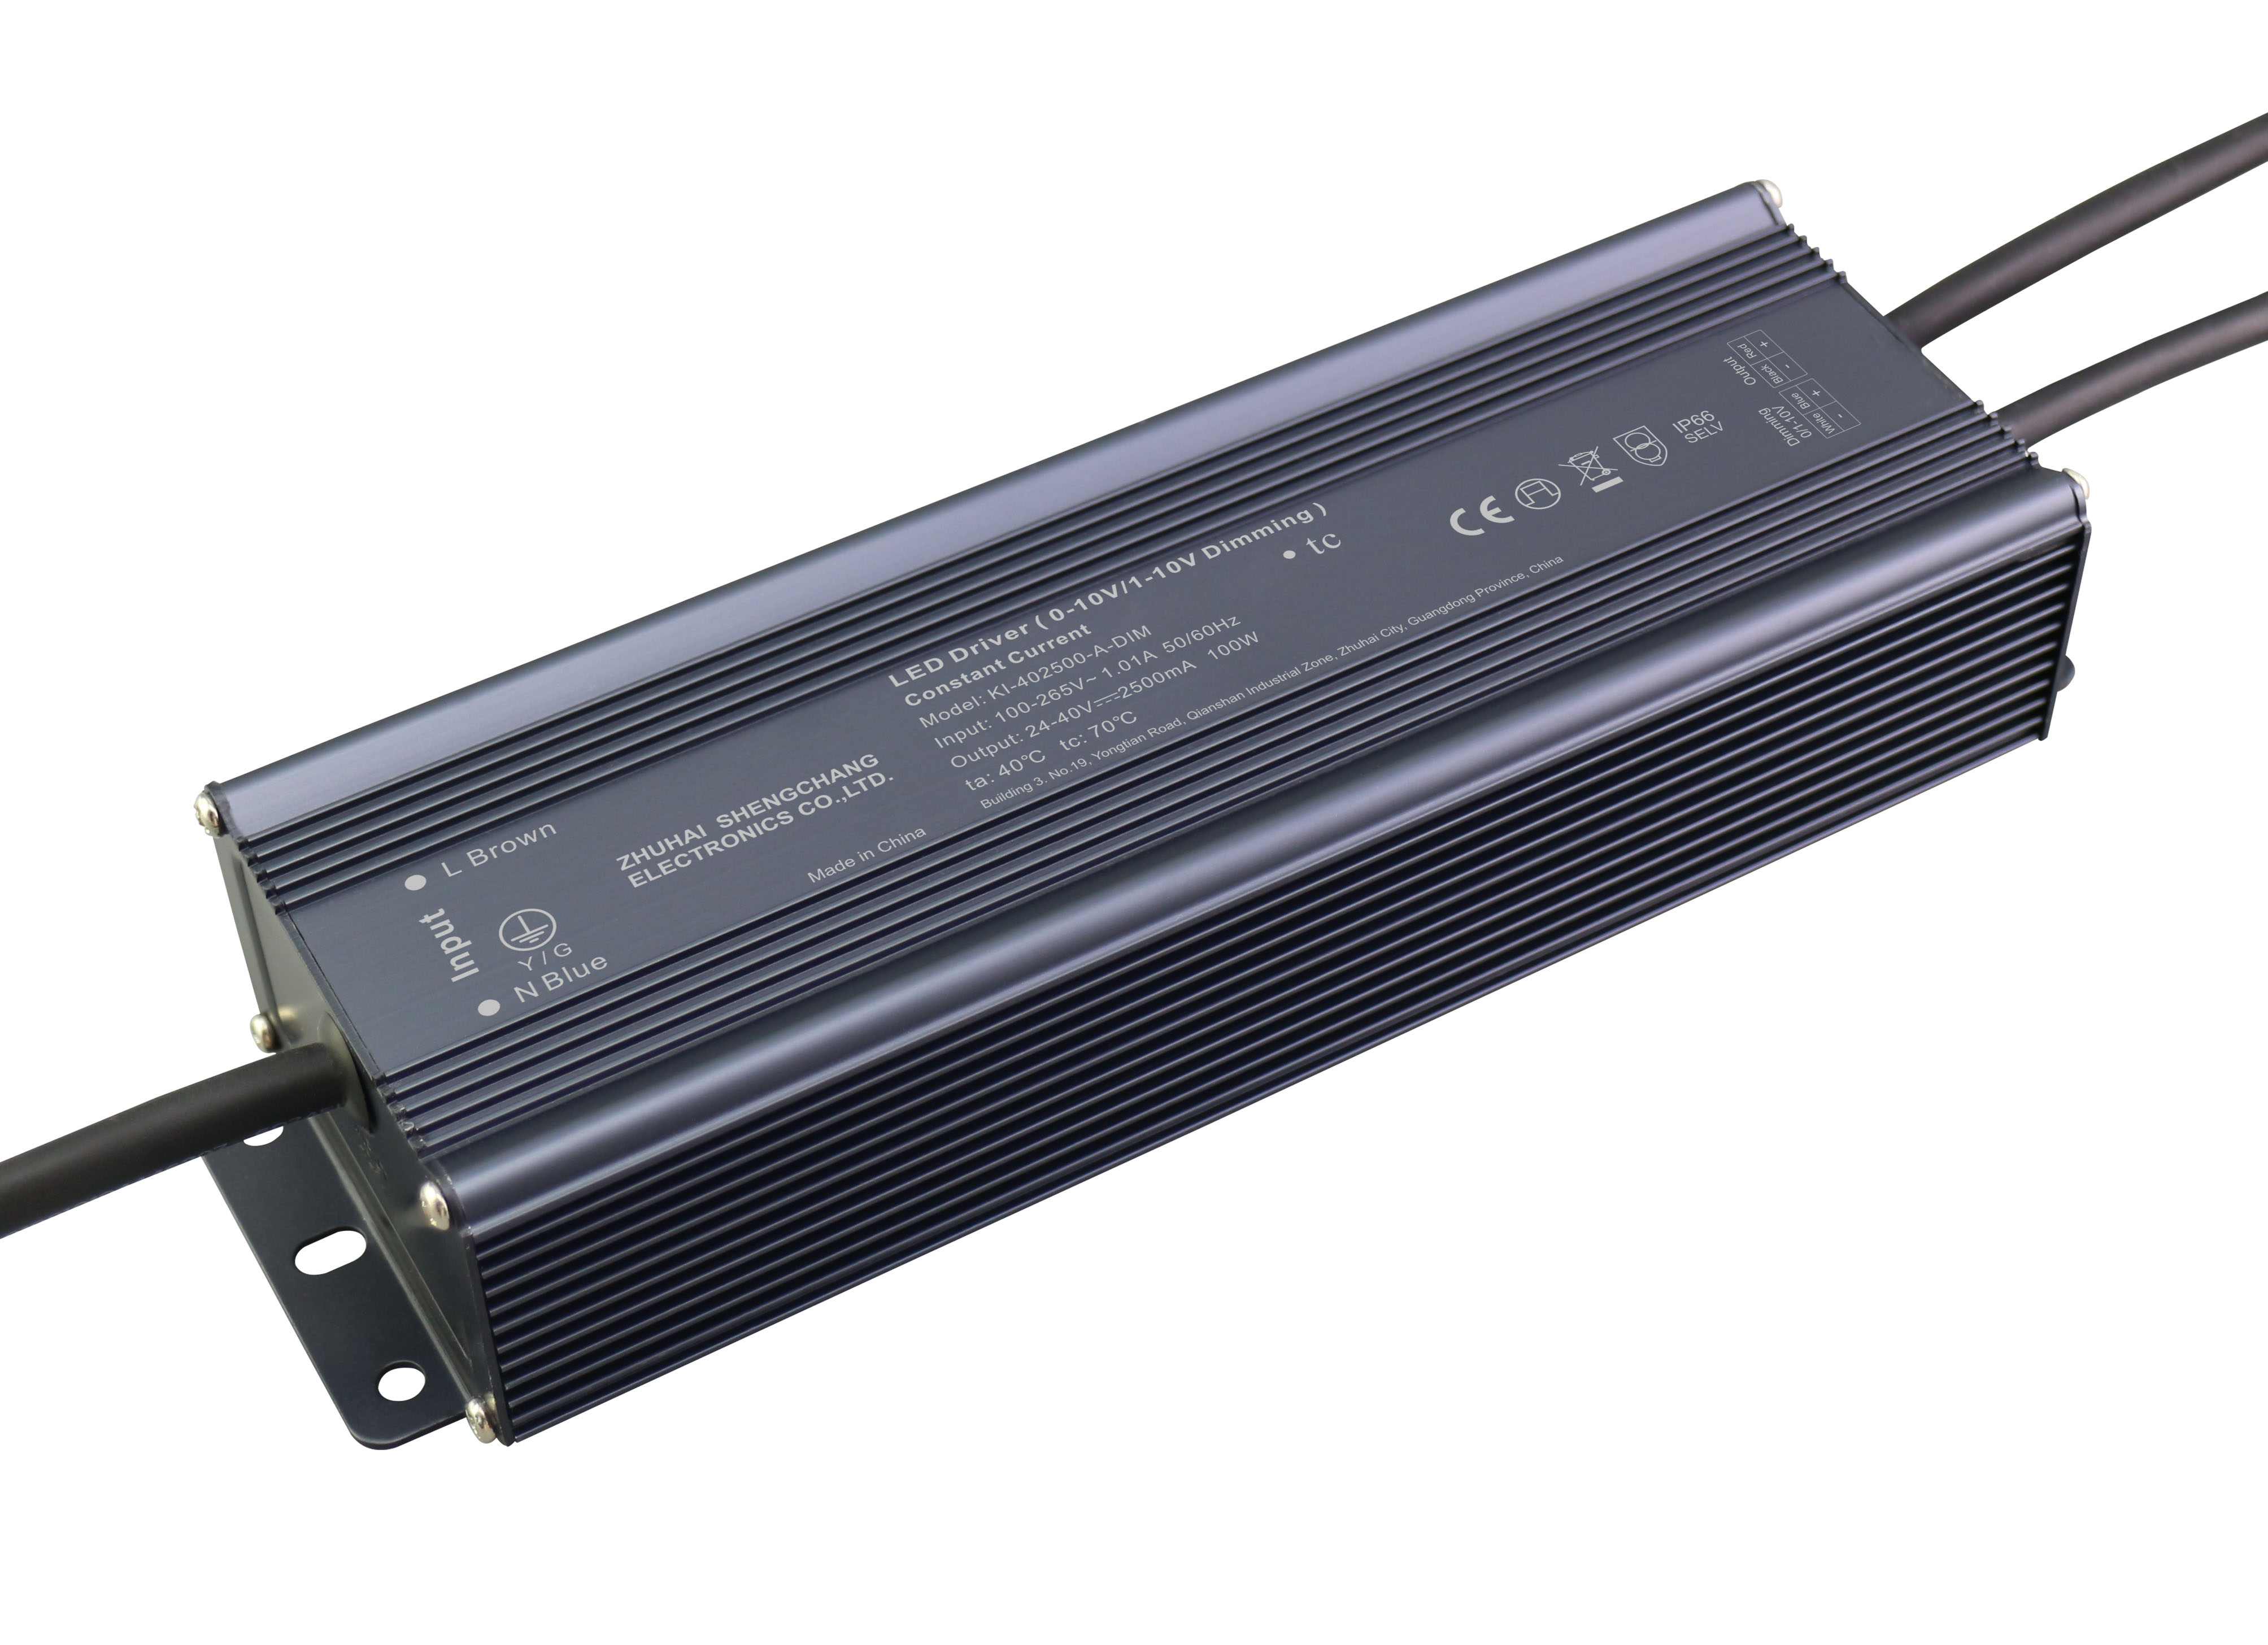 KI-A-DIM Series 100W IP67 0/1-10V constant current dimmable LED driver